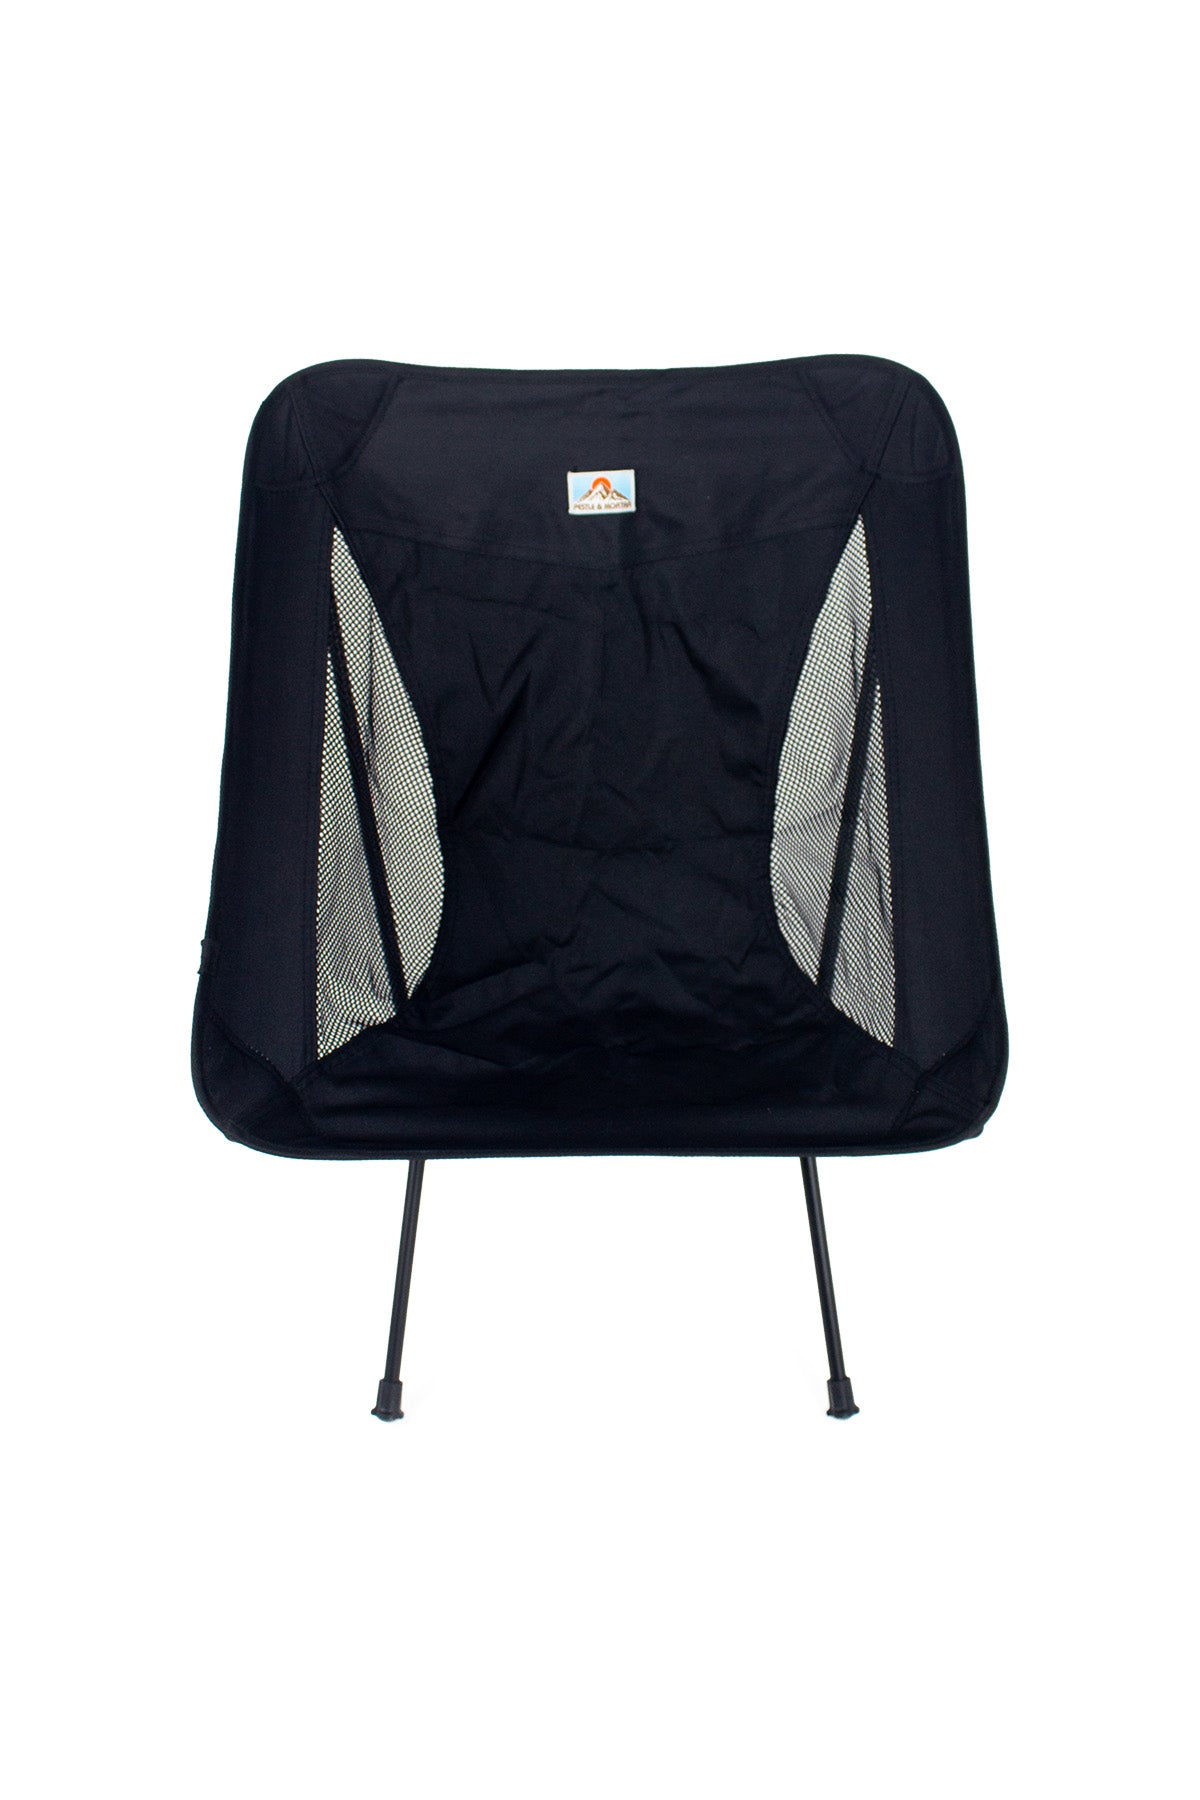 Foldable Camper Chair